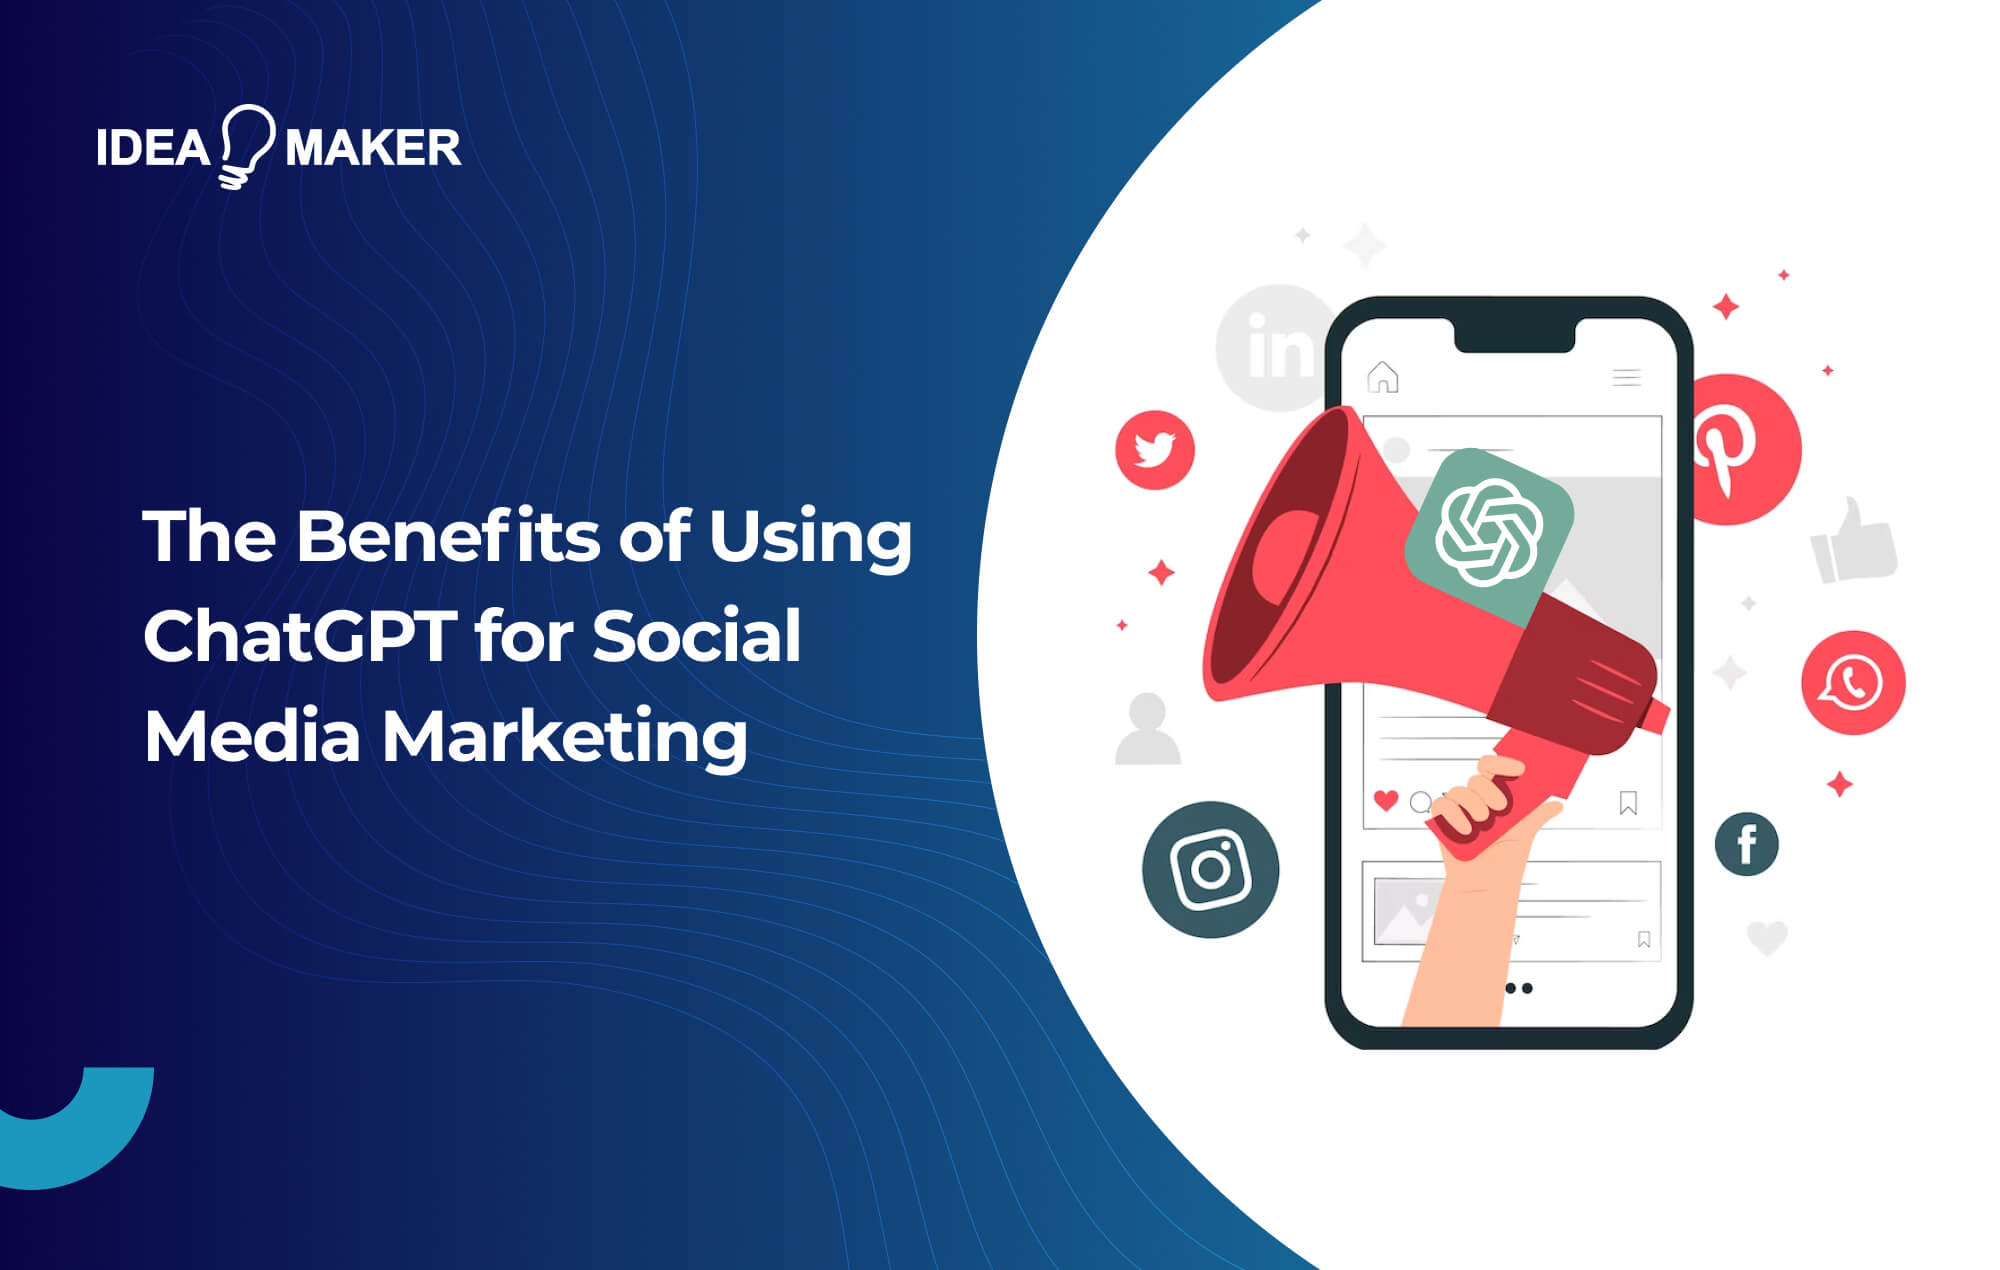 The Benefits of Using ChatGPT for Social Media Marketing